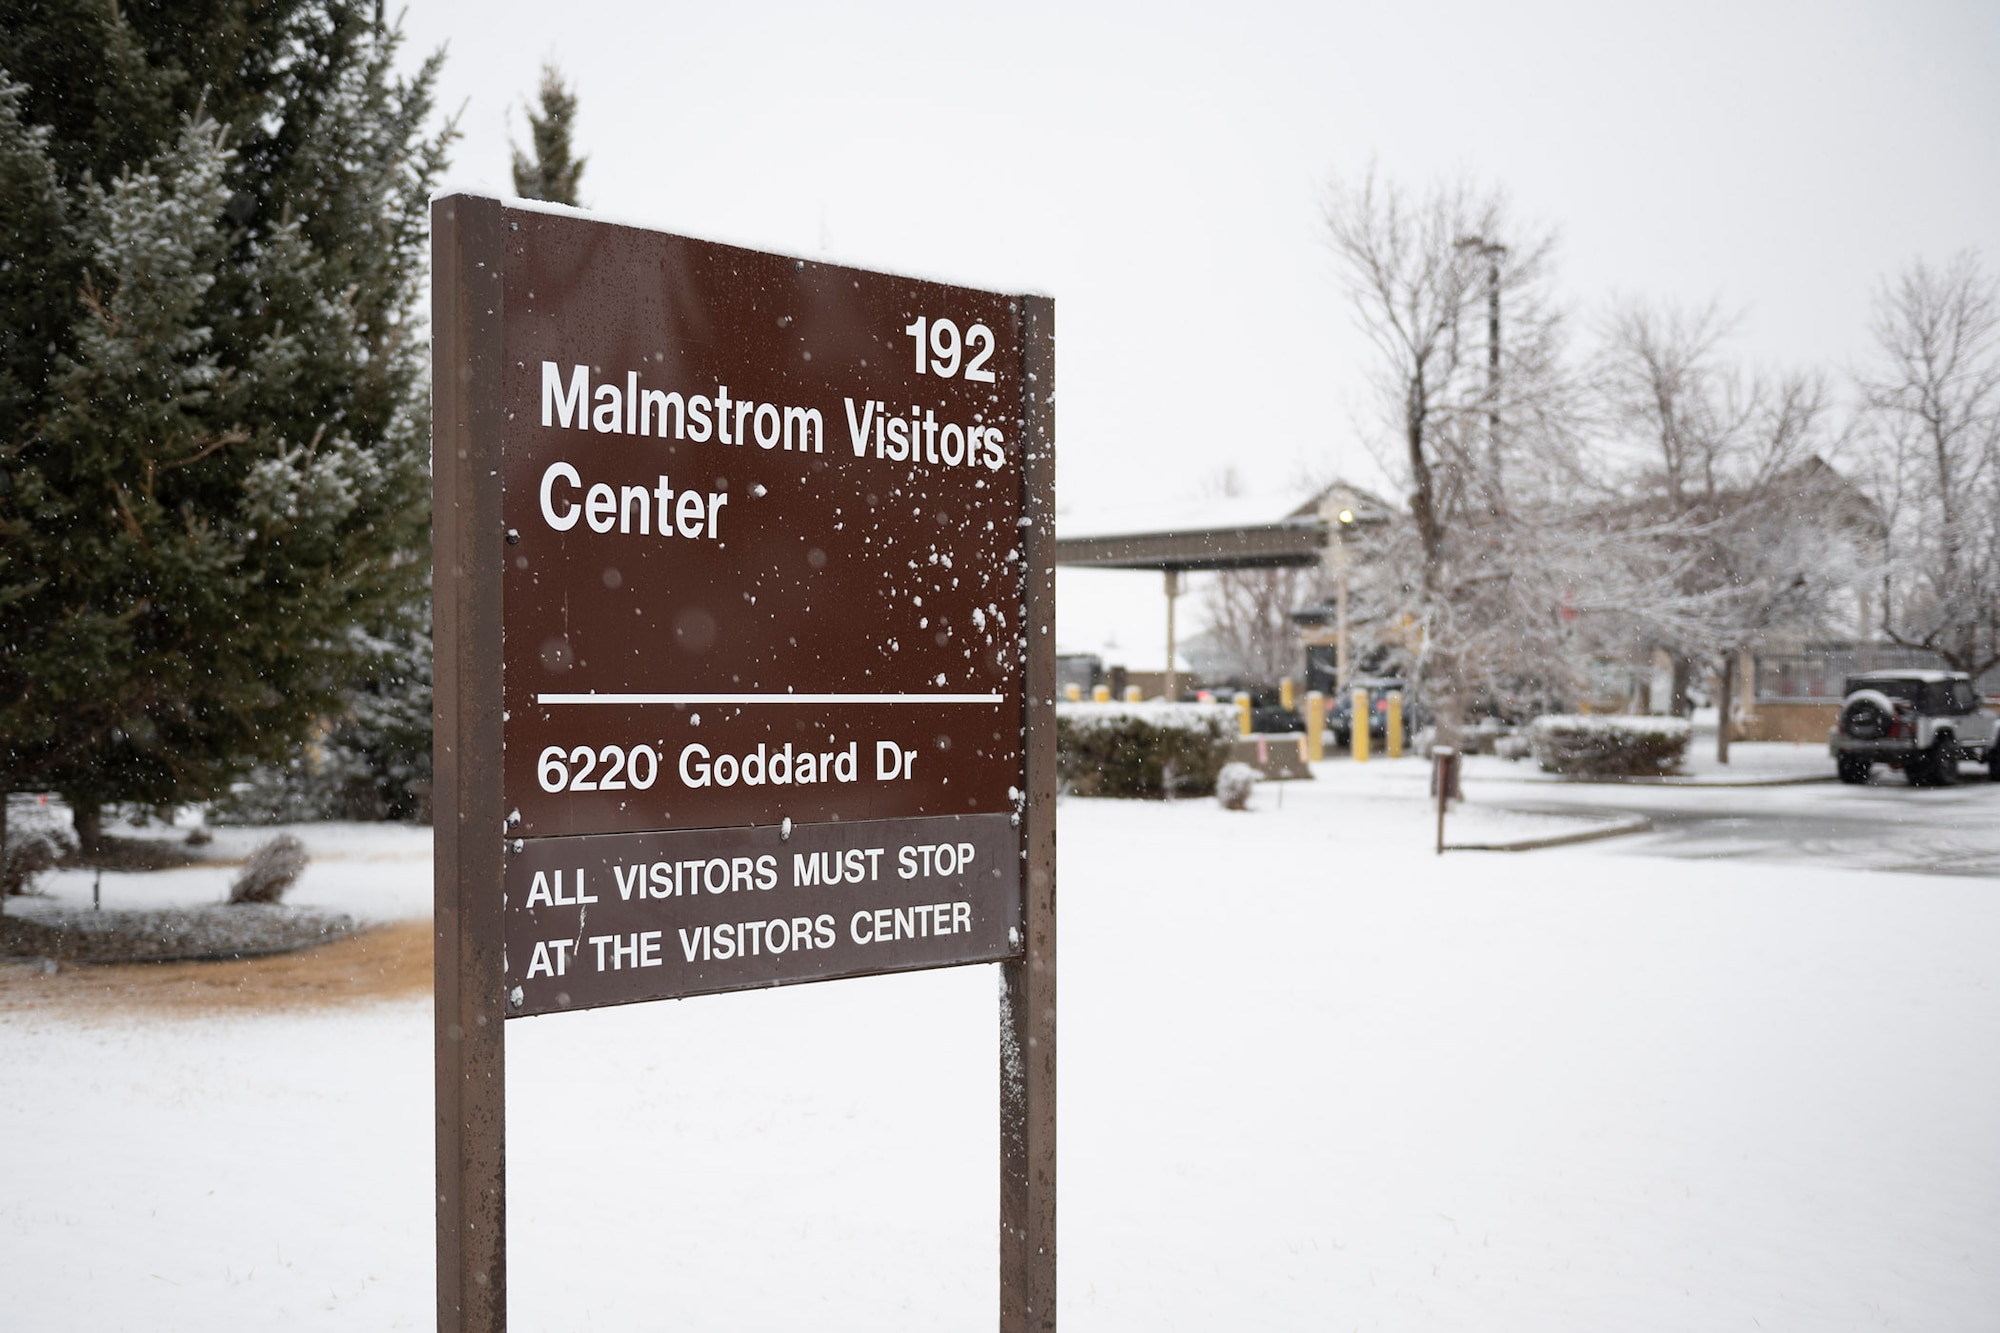 A photo of the Visitor's Center at Malmstrom Air Force Base, Mont. Feb. 15, 2022. (U.S. Air Force photo by Airman 1st Class Elijah Van Zandt)